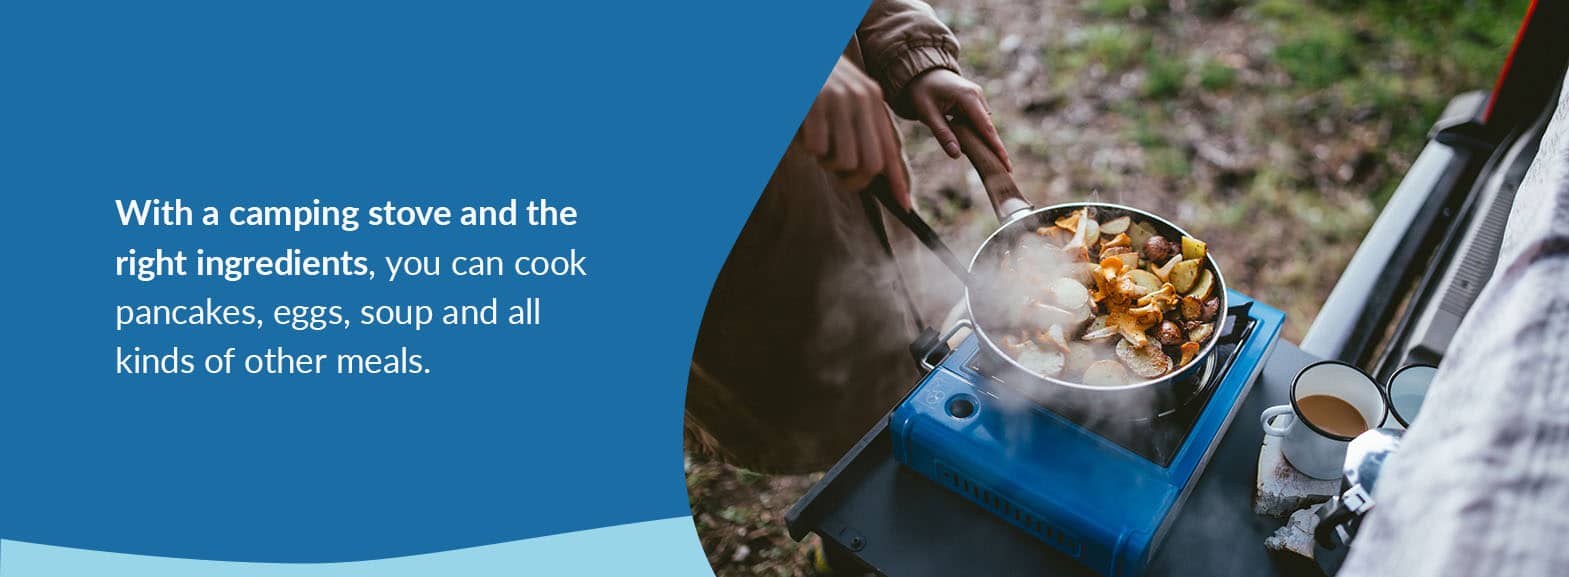 With a camping stove and the right ingredients, you can cook pancakes, eggs, soup and all kinds of other meals.